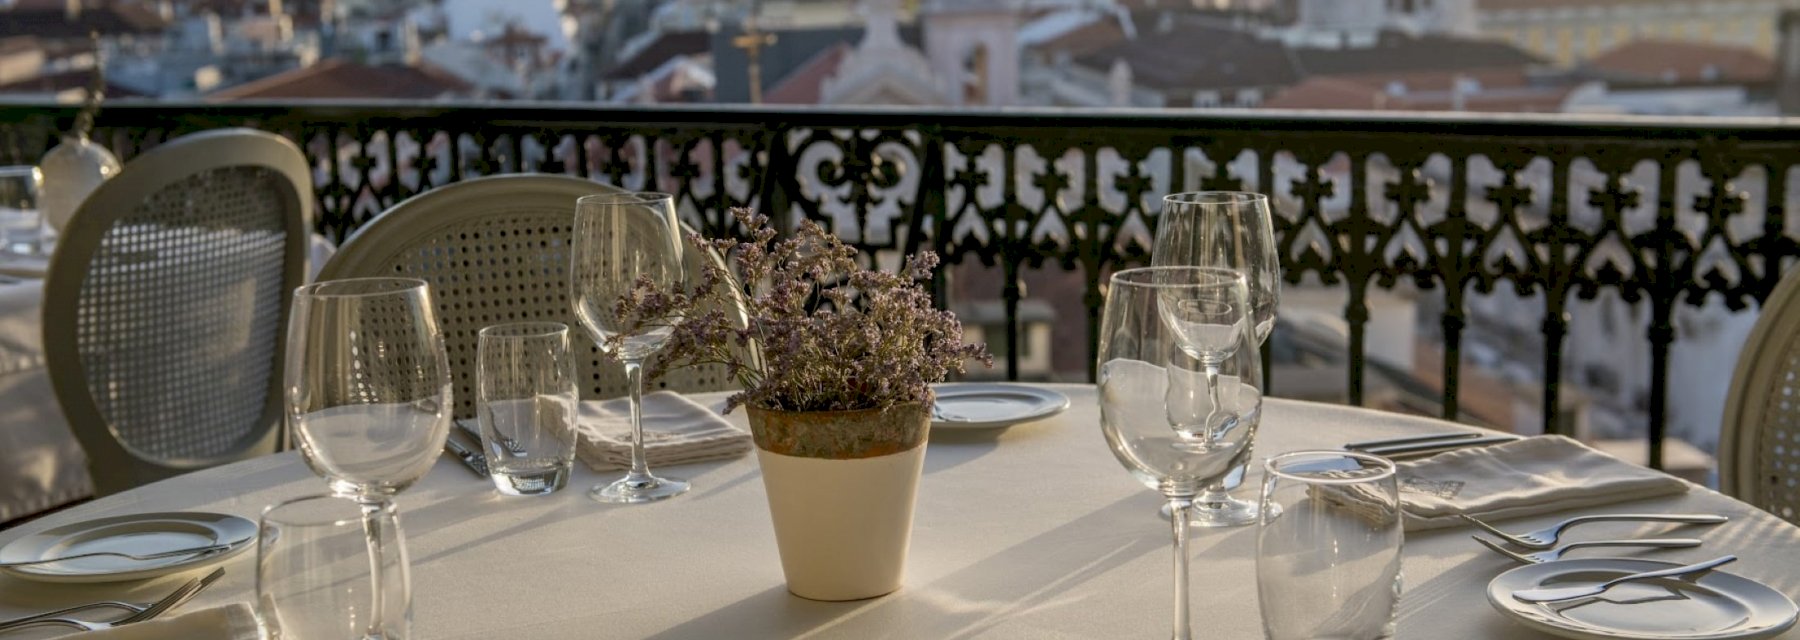 A review of Tagide — one of Lisbon’s most charming, elegant restaurants